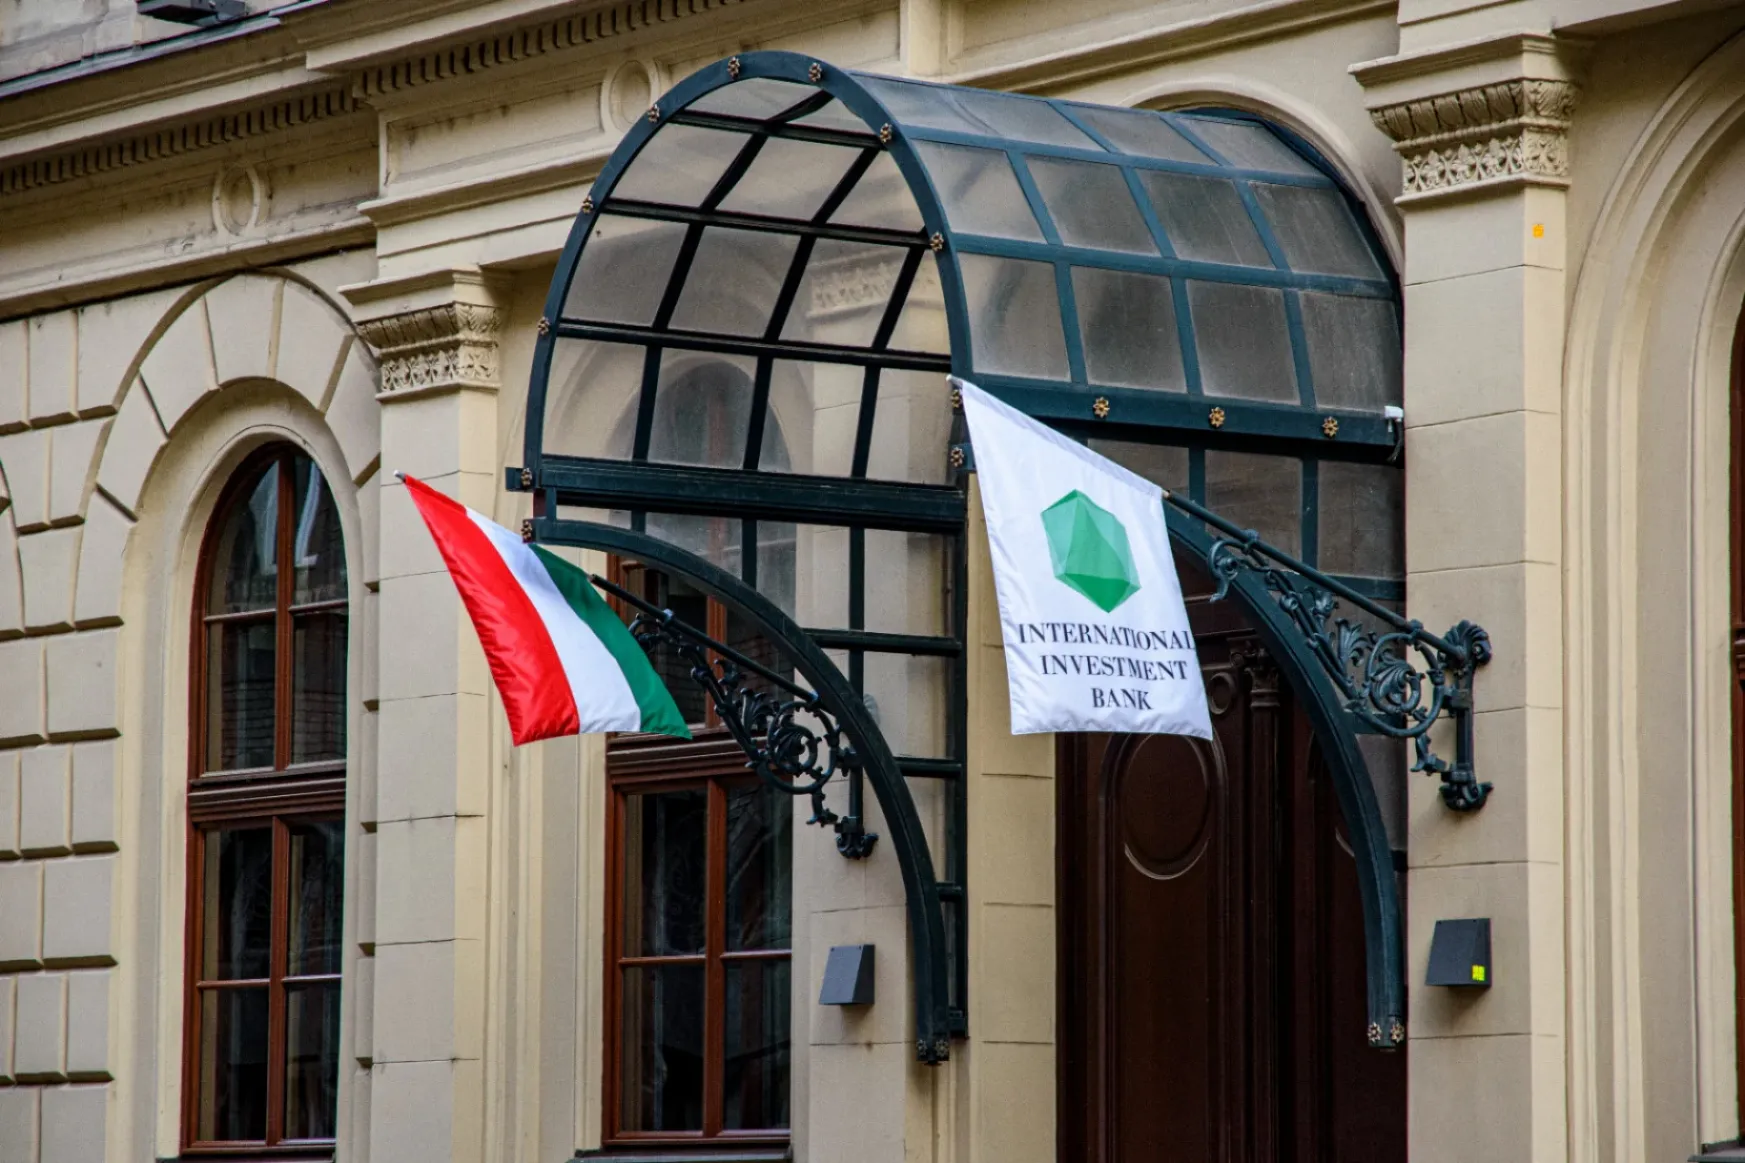 Hungary to quit International Investment Bank, also known as the spy bank